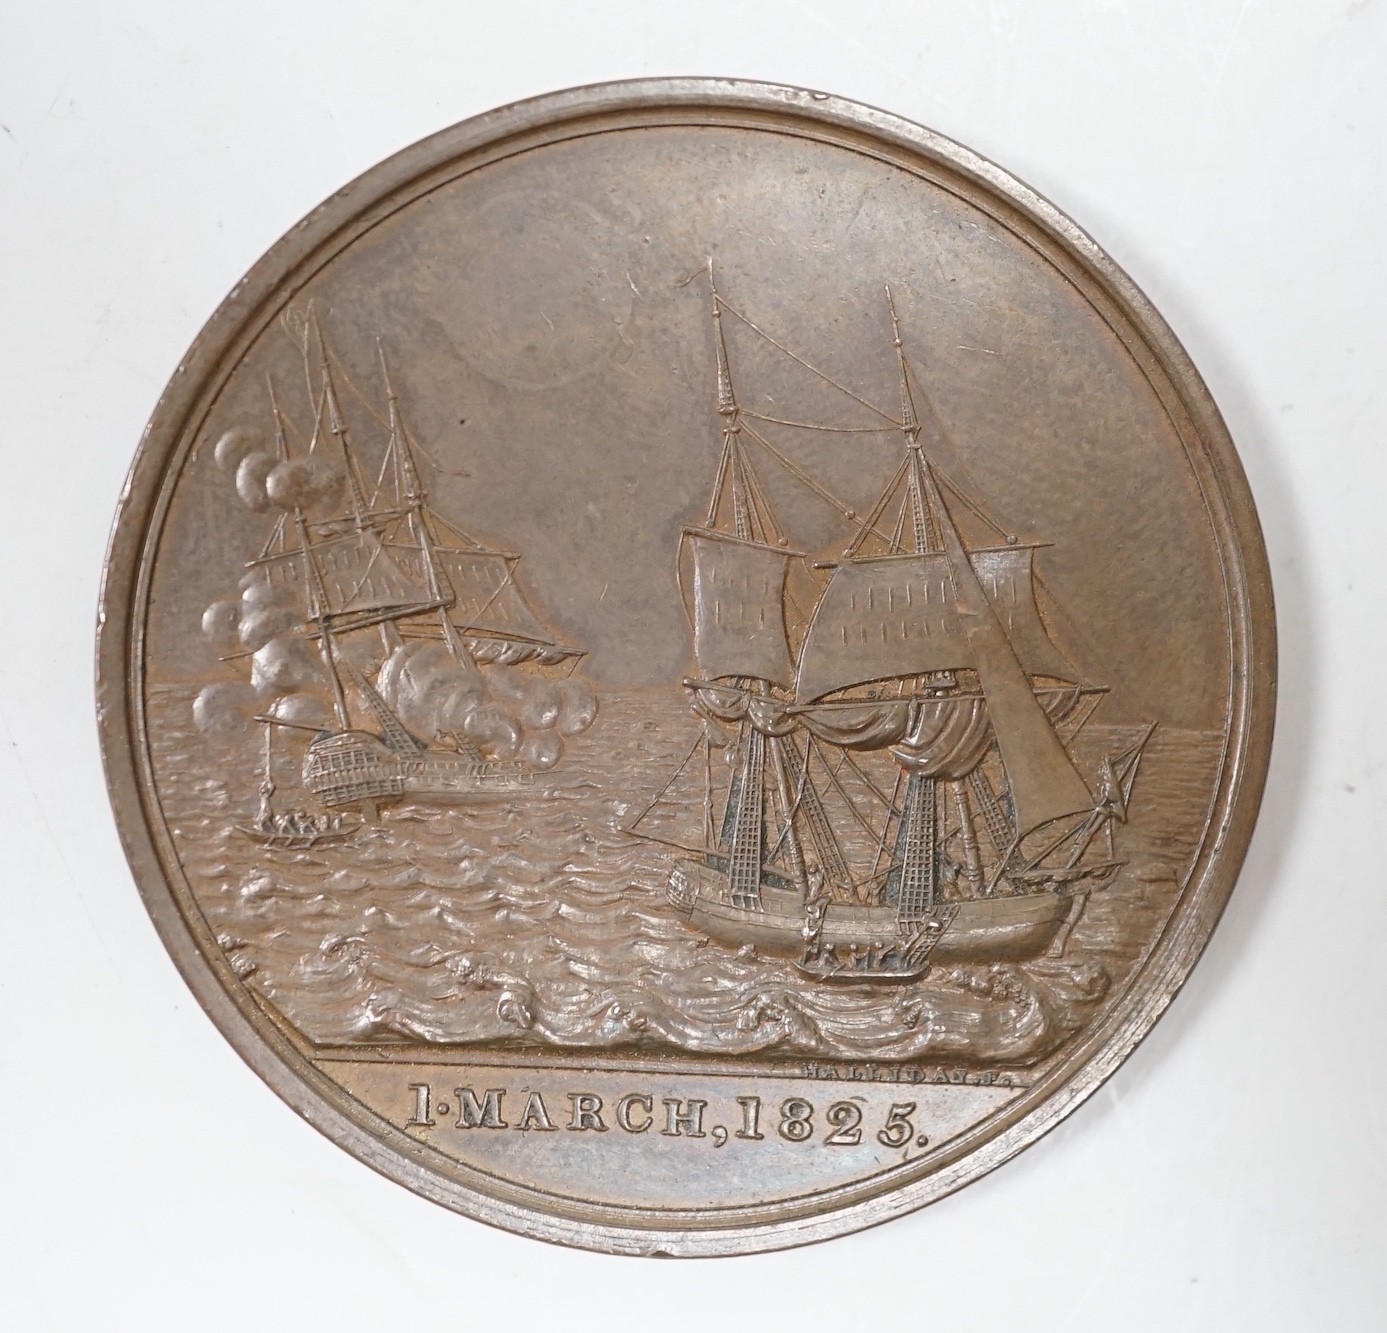 British Historical Medals, The Loss of the East Indiaman Kent, silver medal 1825, by Thomas Halliday